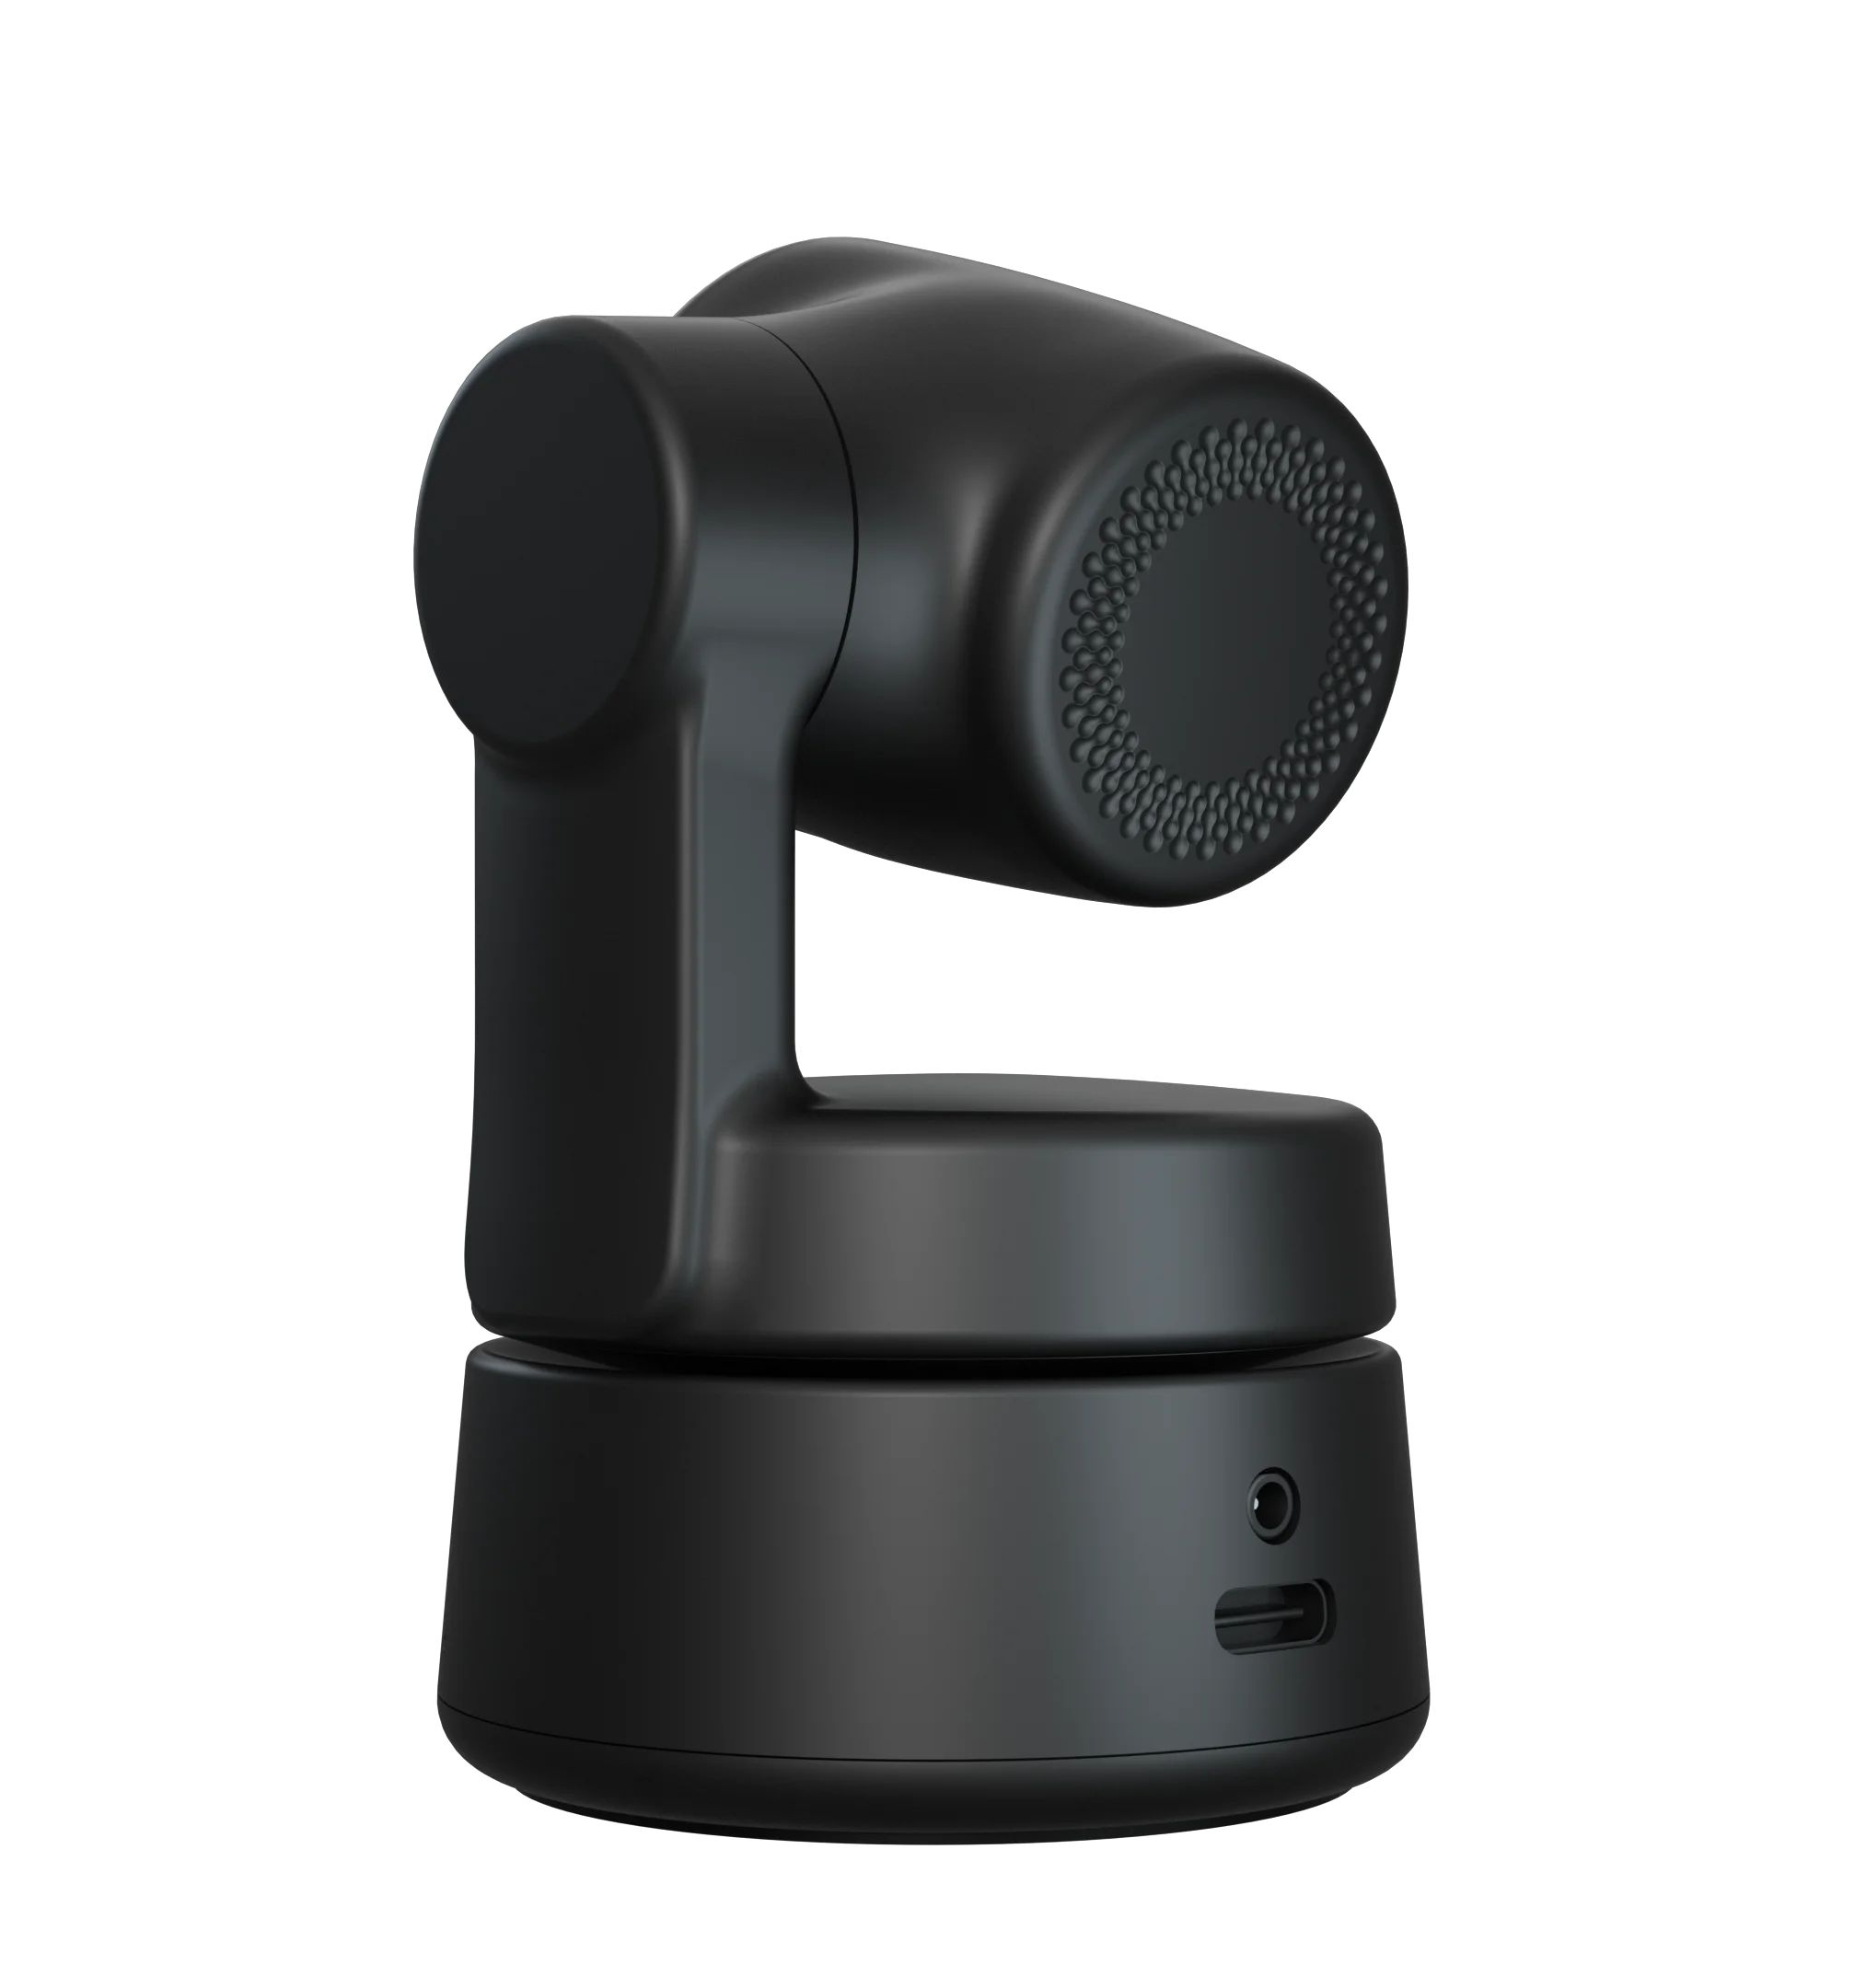 OBSBOT Tiny Auto Director AI Camera 4K Video Webcam Ai Tracking Shooting 1080P/30fps 4K Camera For Live stream Online studying